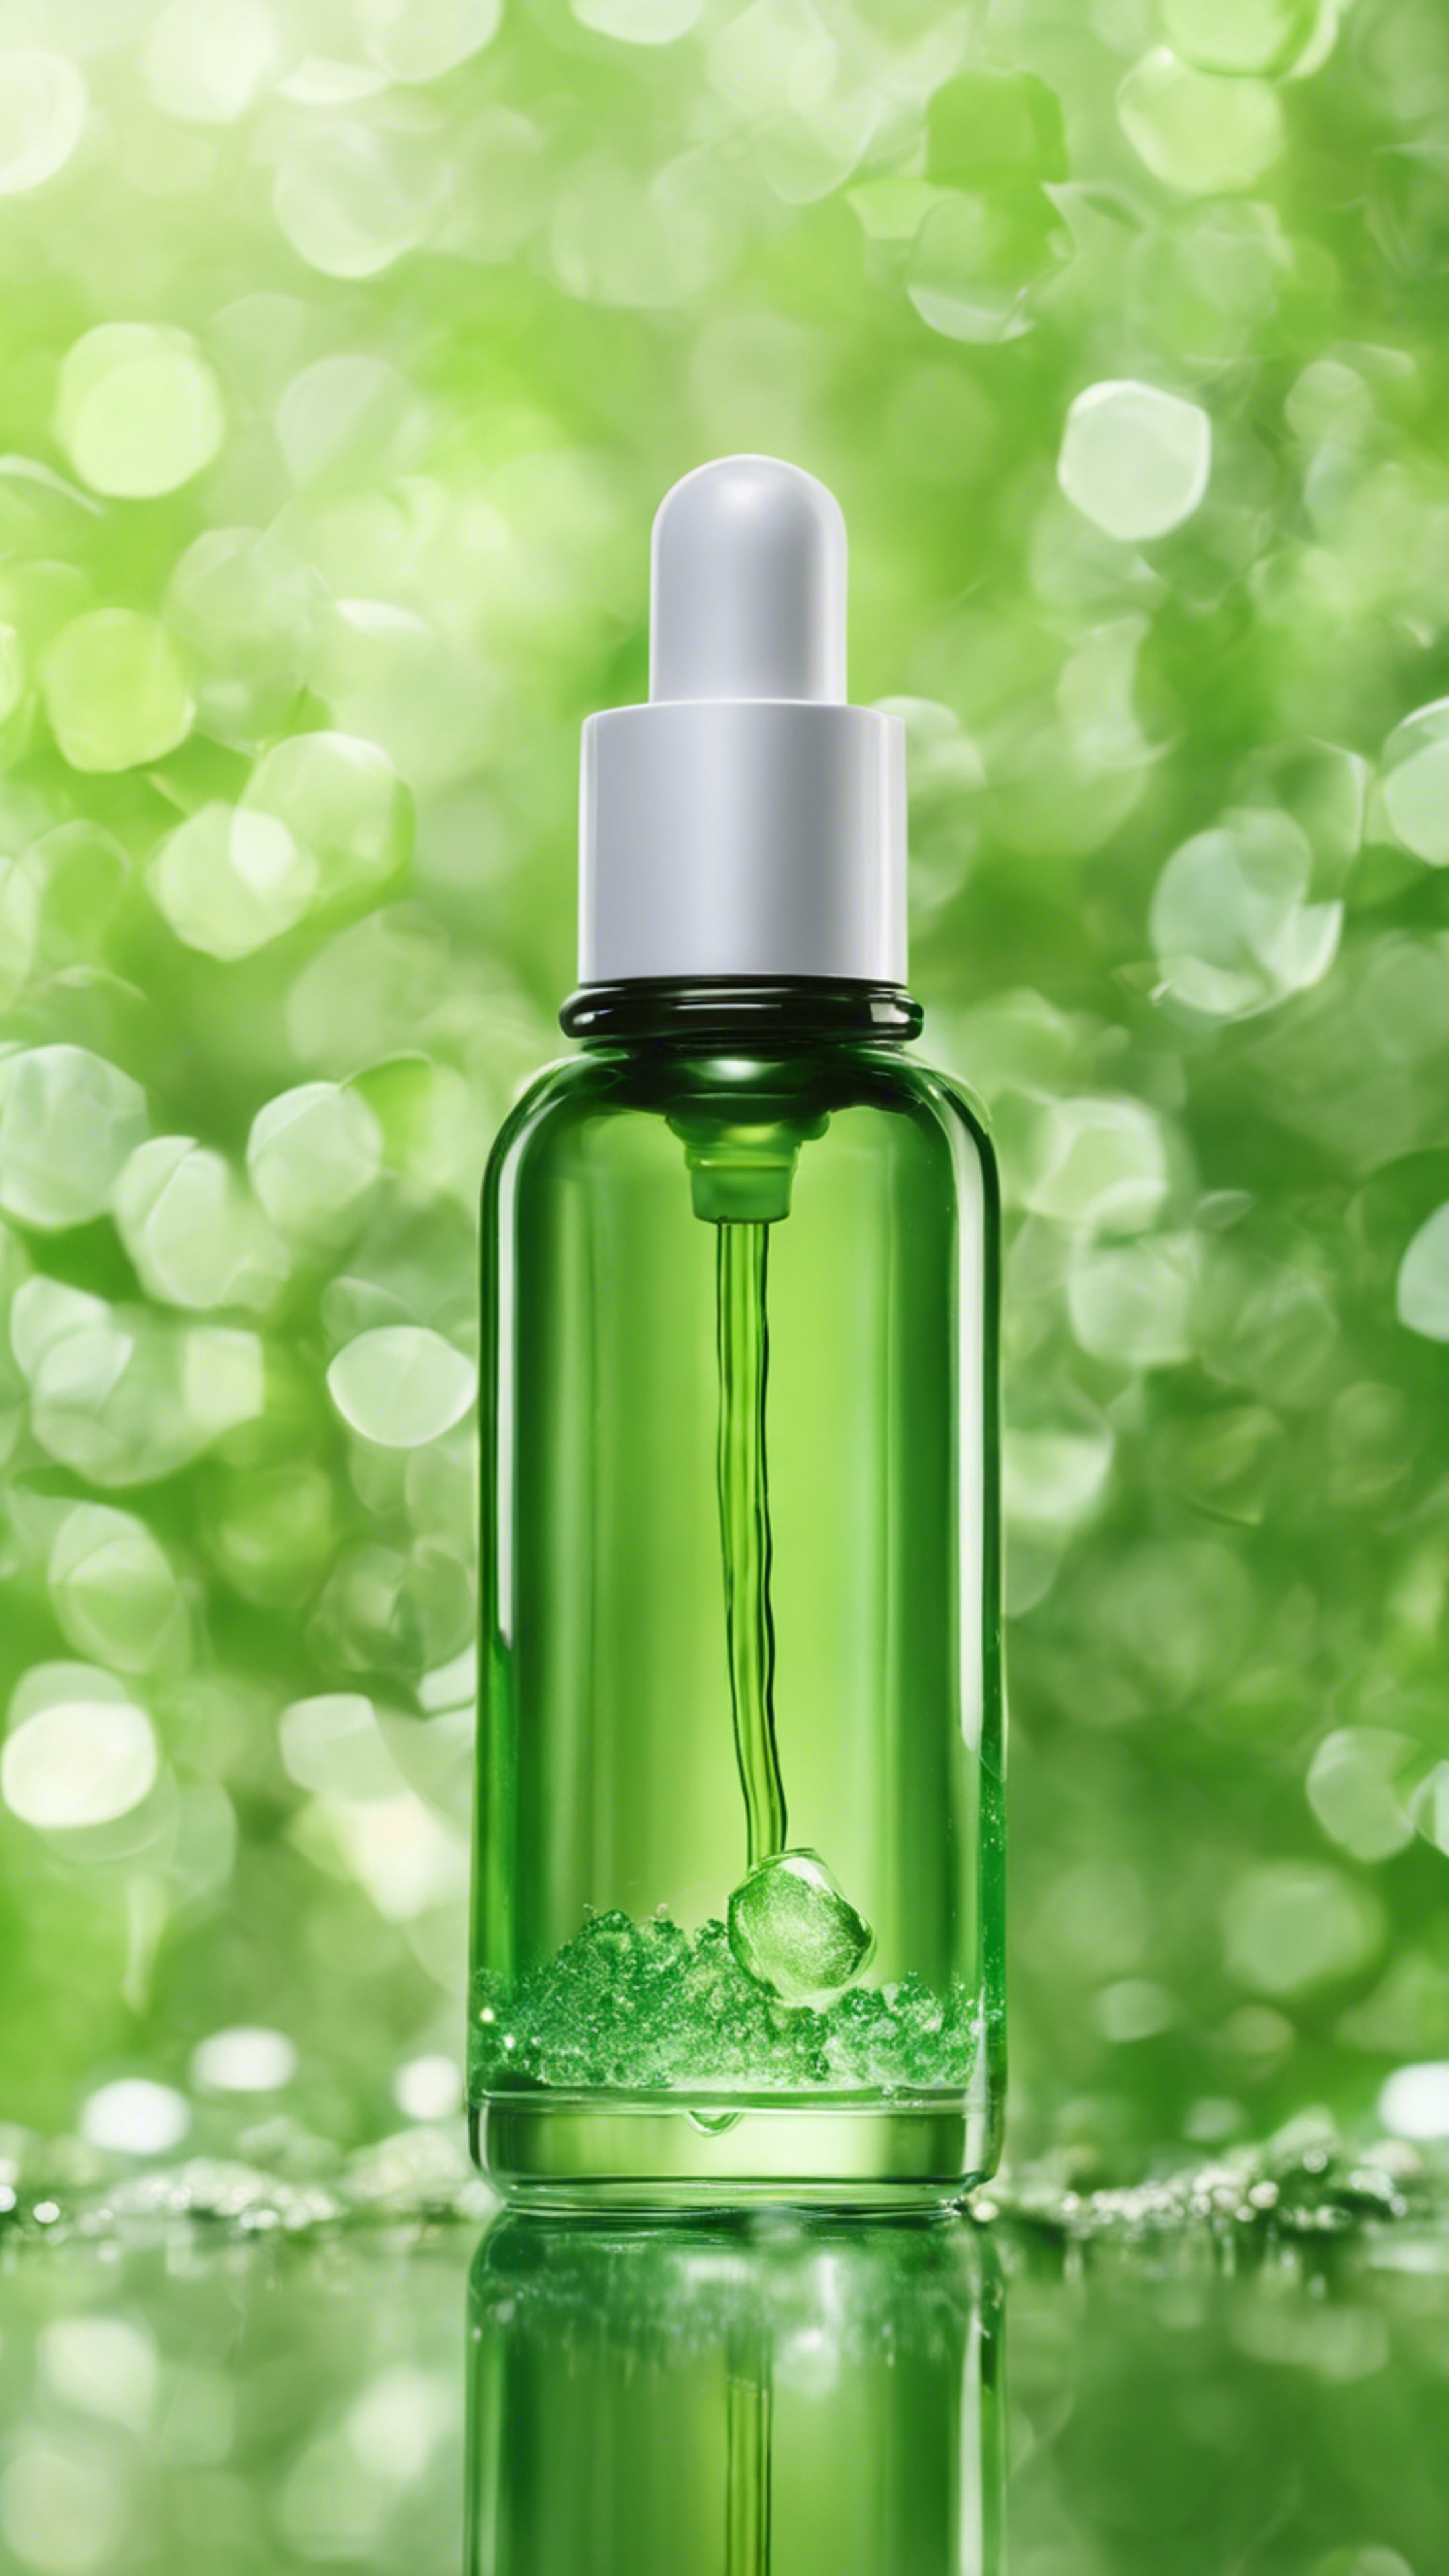 Green an eco-friendly cosmetics company's new hydrating face serum in a recyclable glass bottle. Tapeta[04a9344189e843ad9259]